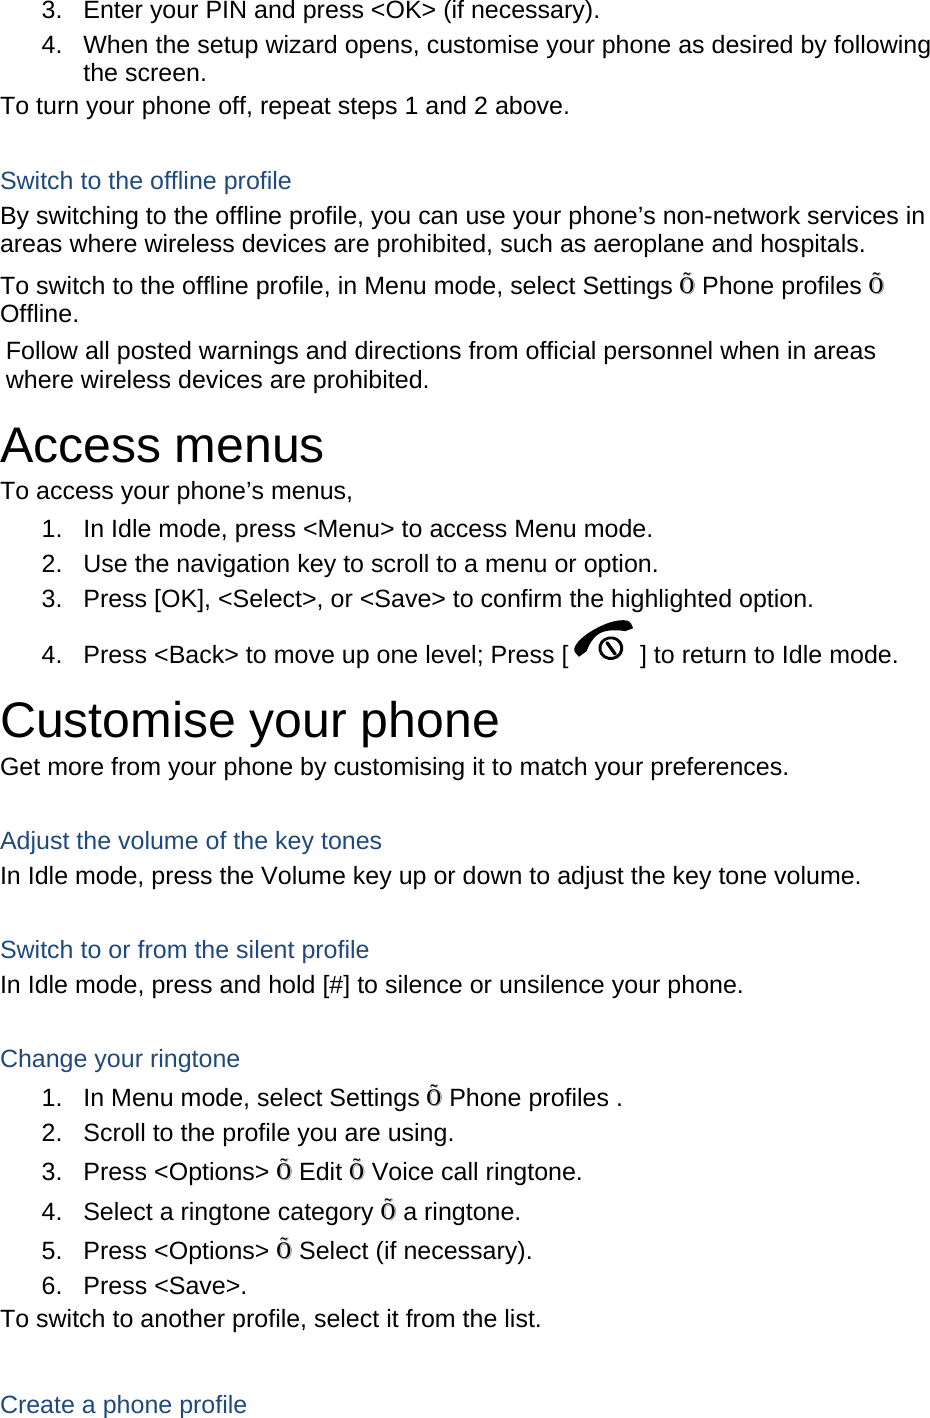 3.  Enter your PIN and press &lt;OK&gt; (if necessary). 4.  When the setup wizard opens, customise your phone as desired by following the screen. To turn your phone off, repeat steps 1 and 2 above.  Switch to the offline profile By switching to the offline profile, you can use your phone’s non-network services in areas where wireless devices are prohibited, such as aeroplane and hospitals. To switch to the offline profile, in Menu mode, select Settings Õ Phone profiles Õ Offline. Follow all posted warnings and directions from official personnel when in areas where wireless devices are prohibited. Access menus To access your phone’s menus, 1.  In Idle mode, press &lt;Menu&gt; to access Menu mode. 2.  Use the navigation key to scroll to a menu or option. 3.  Press [OK], &lt;Select&gt;, or &lt;Save&gt; to confirm the highlighted option. 4.  Press &lt;Back&gt; to move up one level; Press [ ] to return to Idle mode. Customise your phone Get more from your phone by customising it to match your preferences.  Adjust the volume of the key tones In Idle mode, press the Volume key up or down to adjust the key tone volume.  Switch to or from the silent profile In Idle mode, press and hold [#] to silence or unsilence your phone.  Change your ringtone 1.  In Menu mode, select Settings Õ Phone profiles . 2.  Scroll to the profile you are using. 3. Press &lt;Options&gt; Õ Edit Õ Voice call ringtone. 4.  Select a ringtone category Õ a ringtone. 5. Press &lt;Options&gt; Õ Select (if necessary). 6. Press &lt;Save&gt;. To switch to another profile, select it from the list.  Create a phone profile 